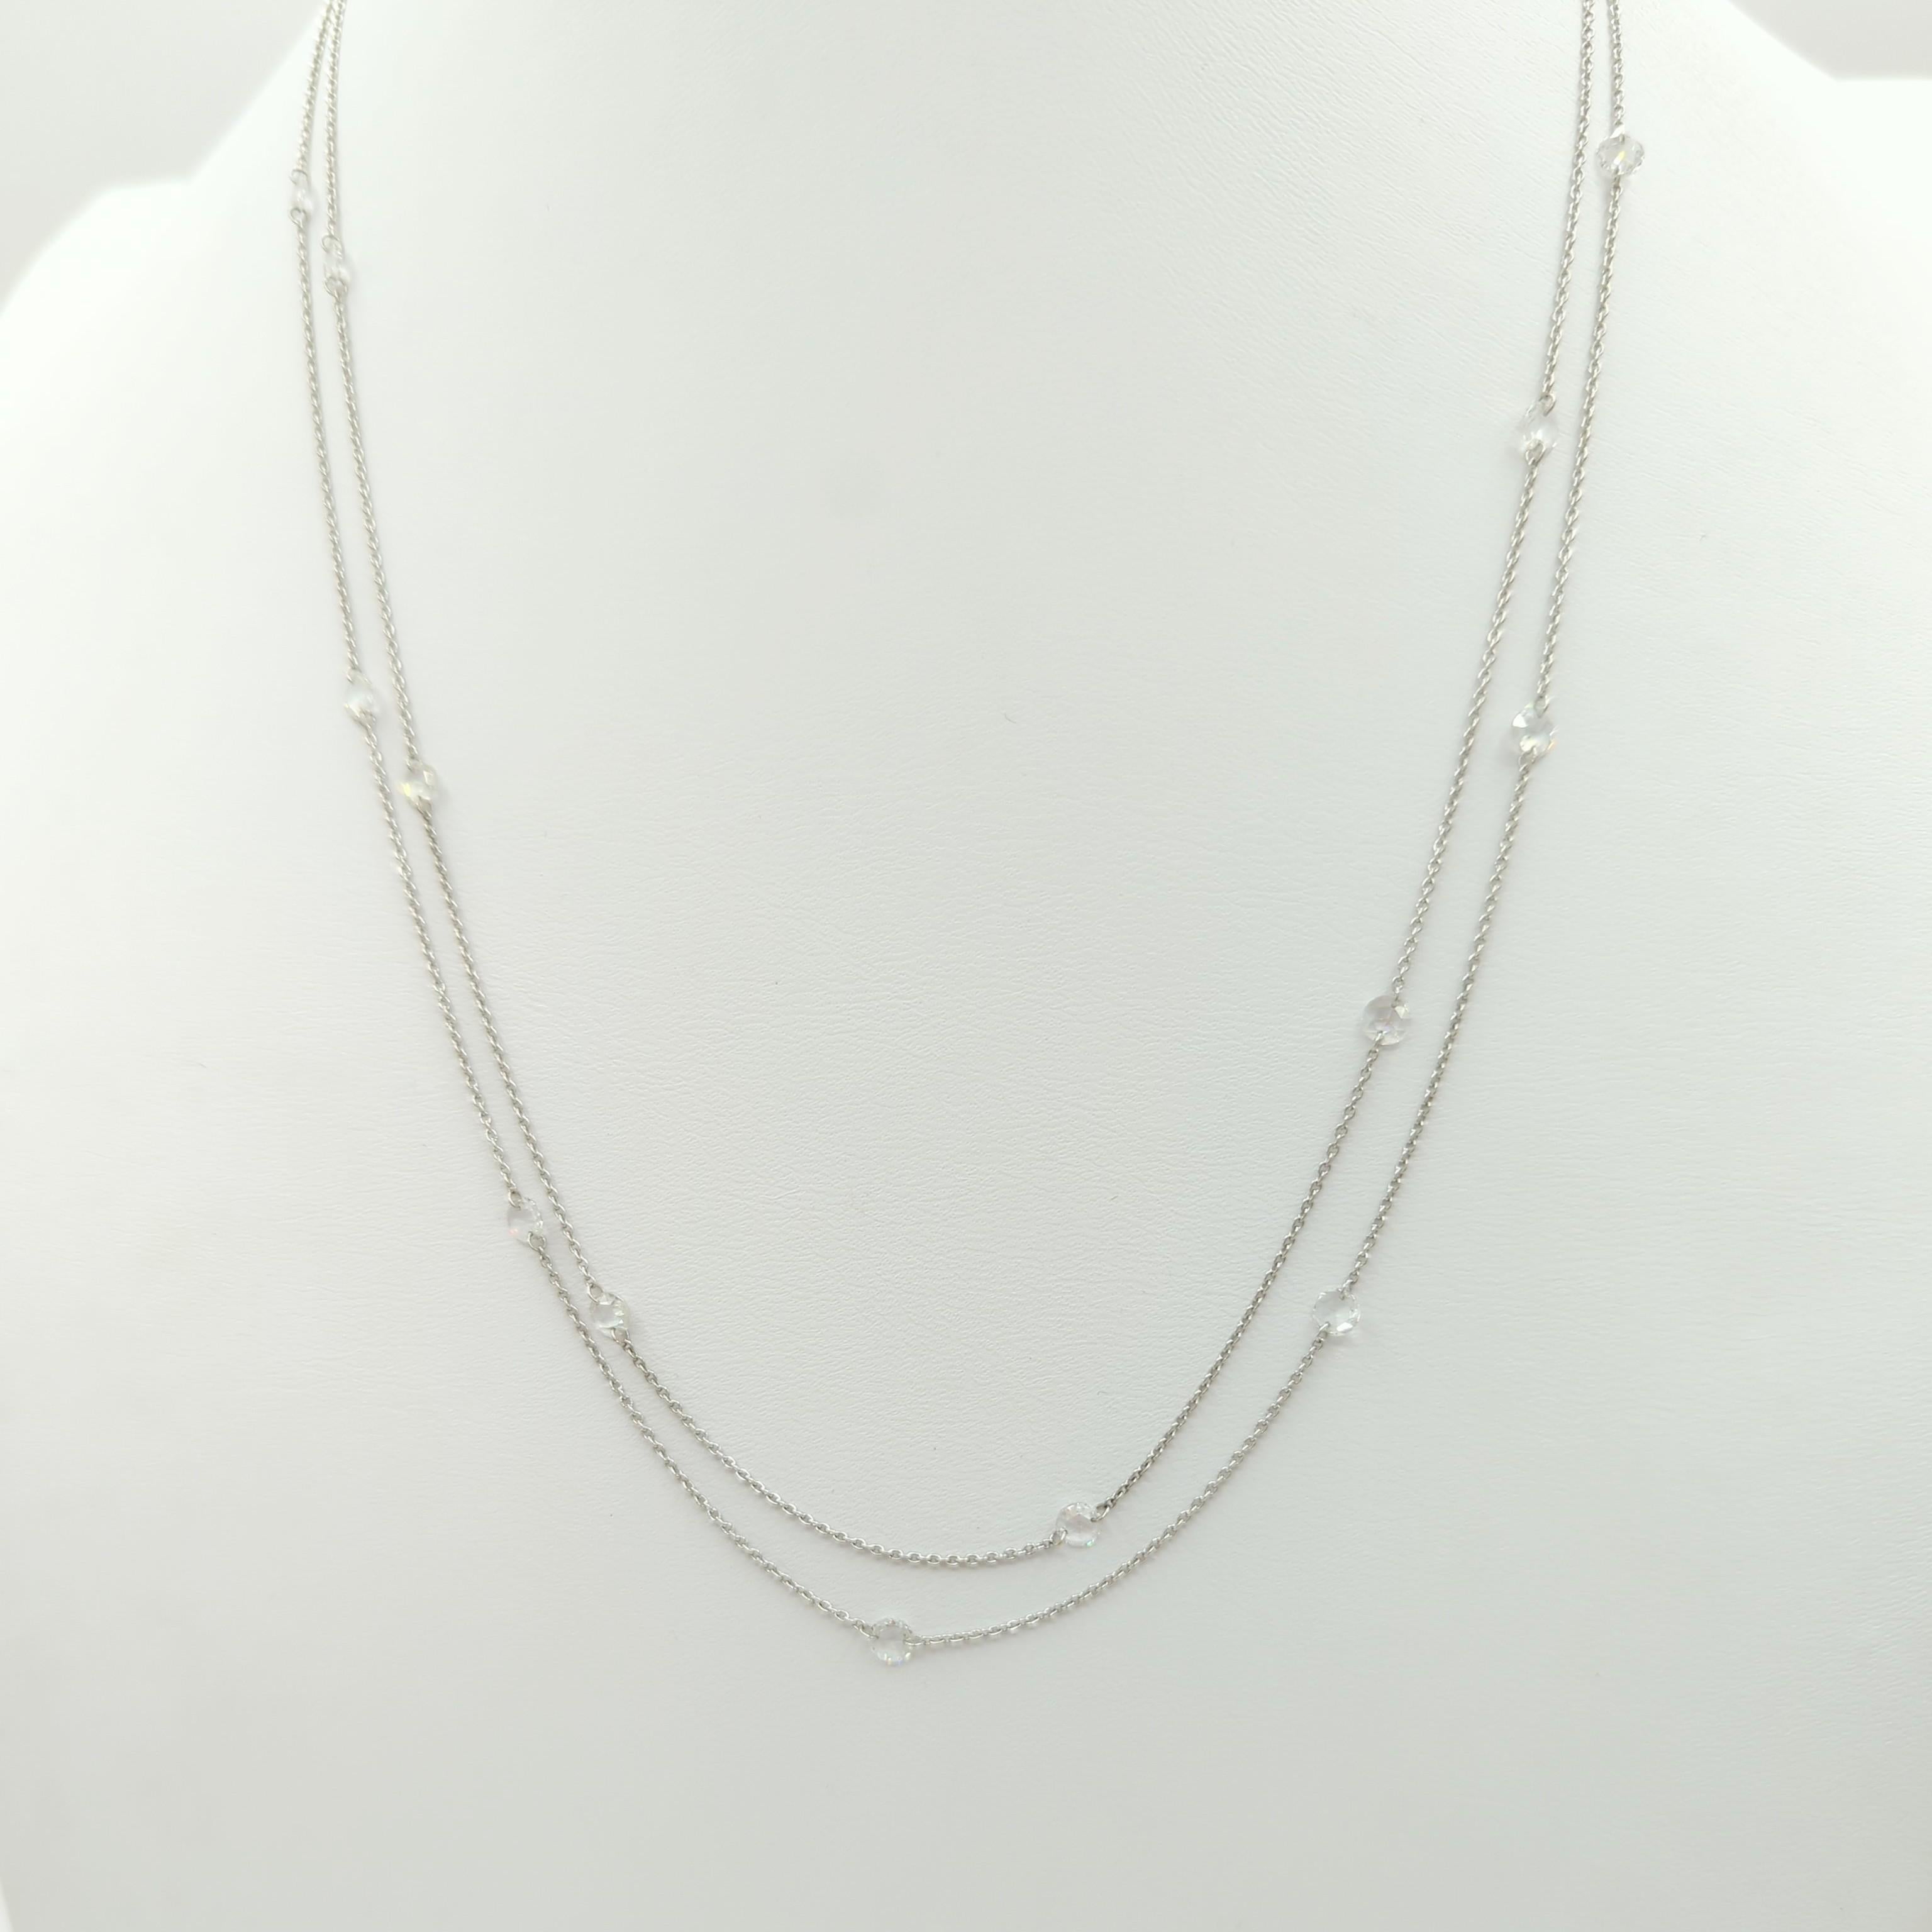 Rose Cut White Diamond Necklace in 18K White Gold 1